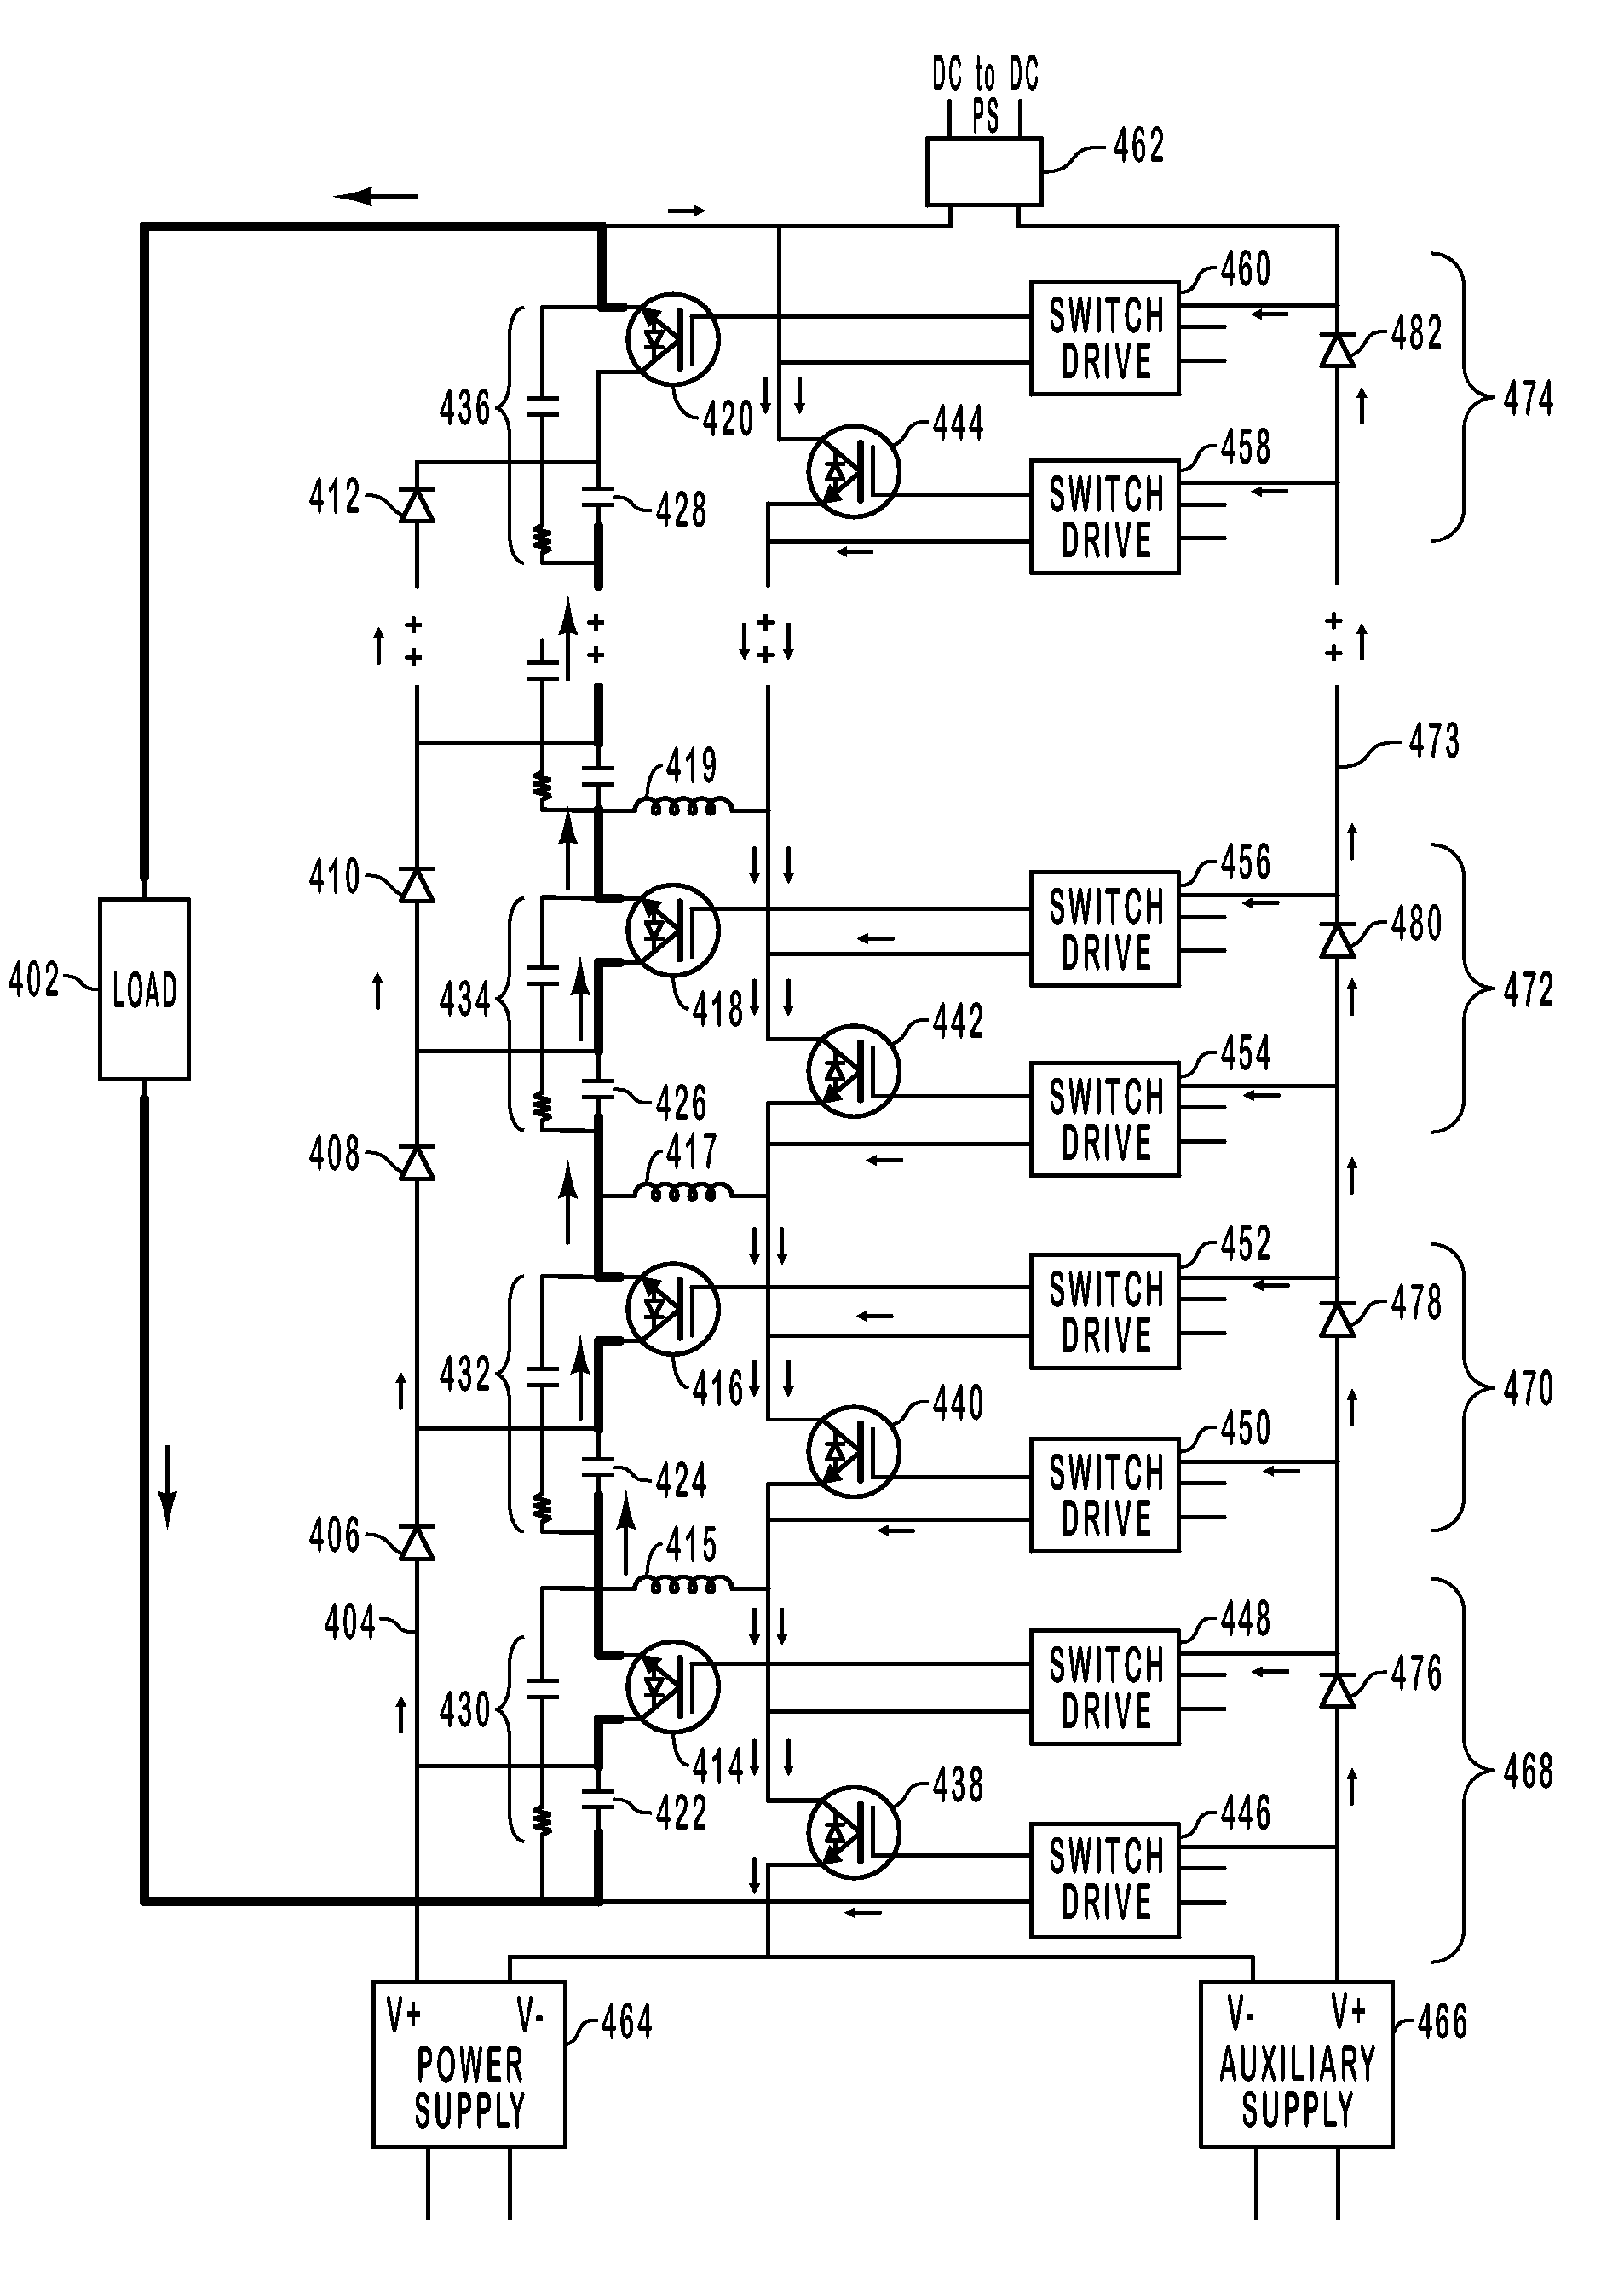 High voltage pulsed power supply using solid state switches with voltage cell isolation